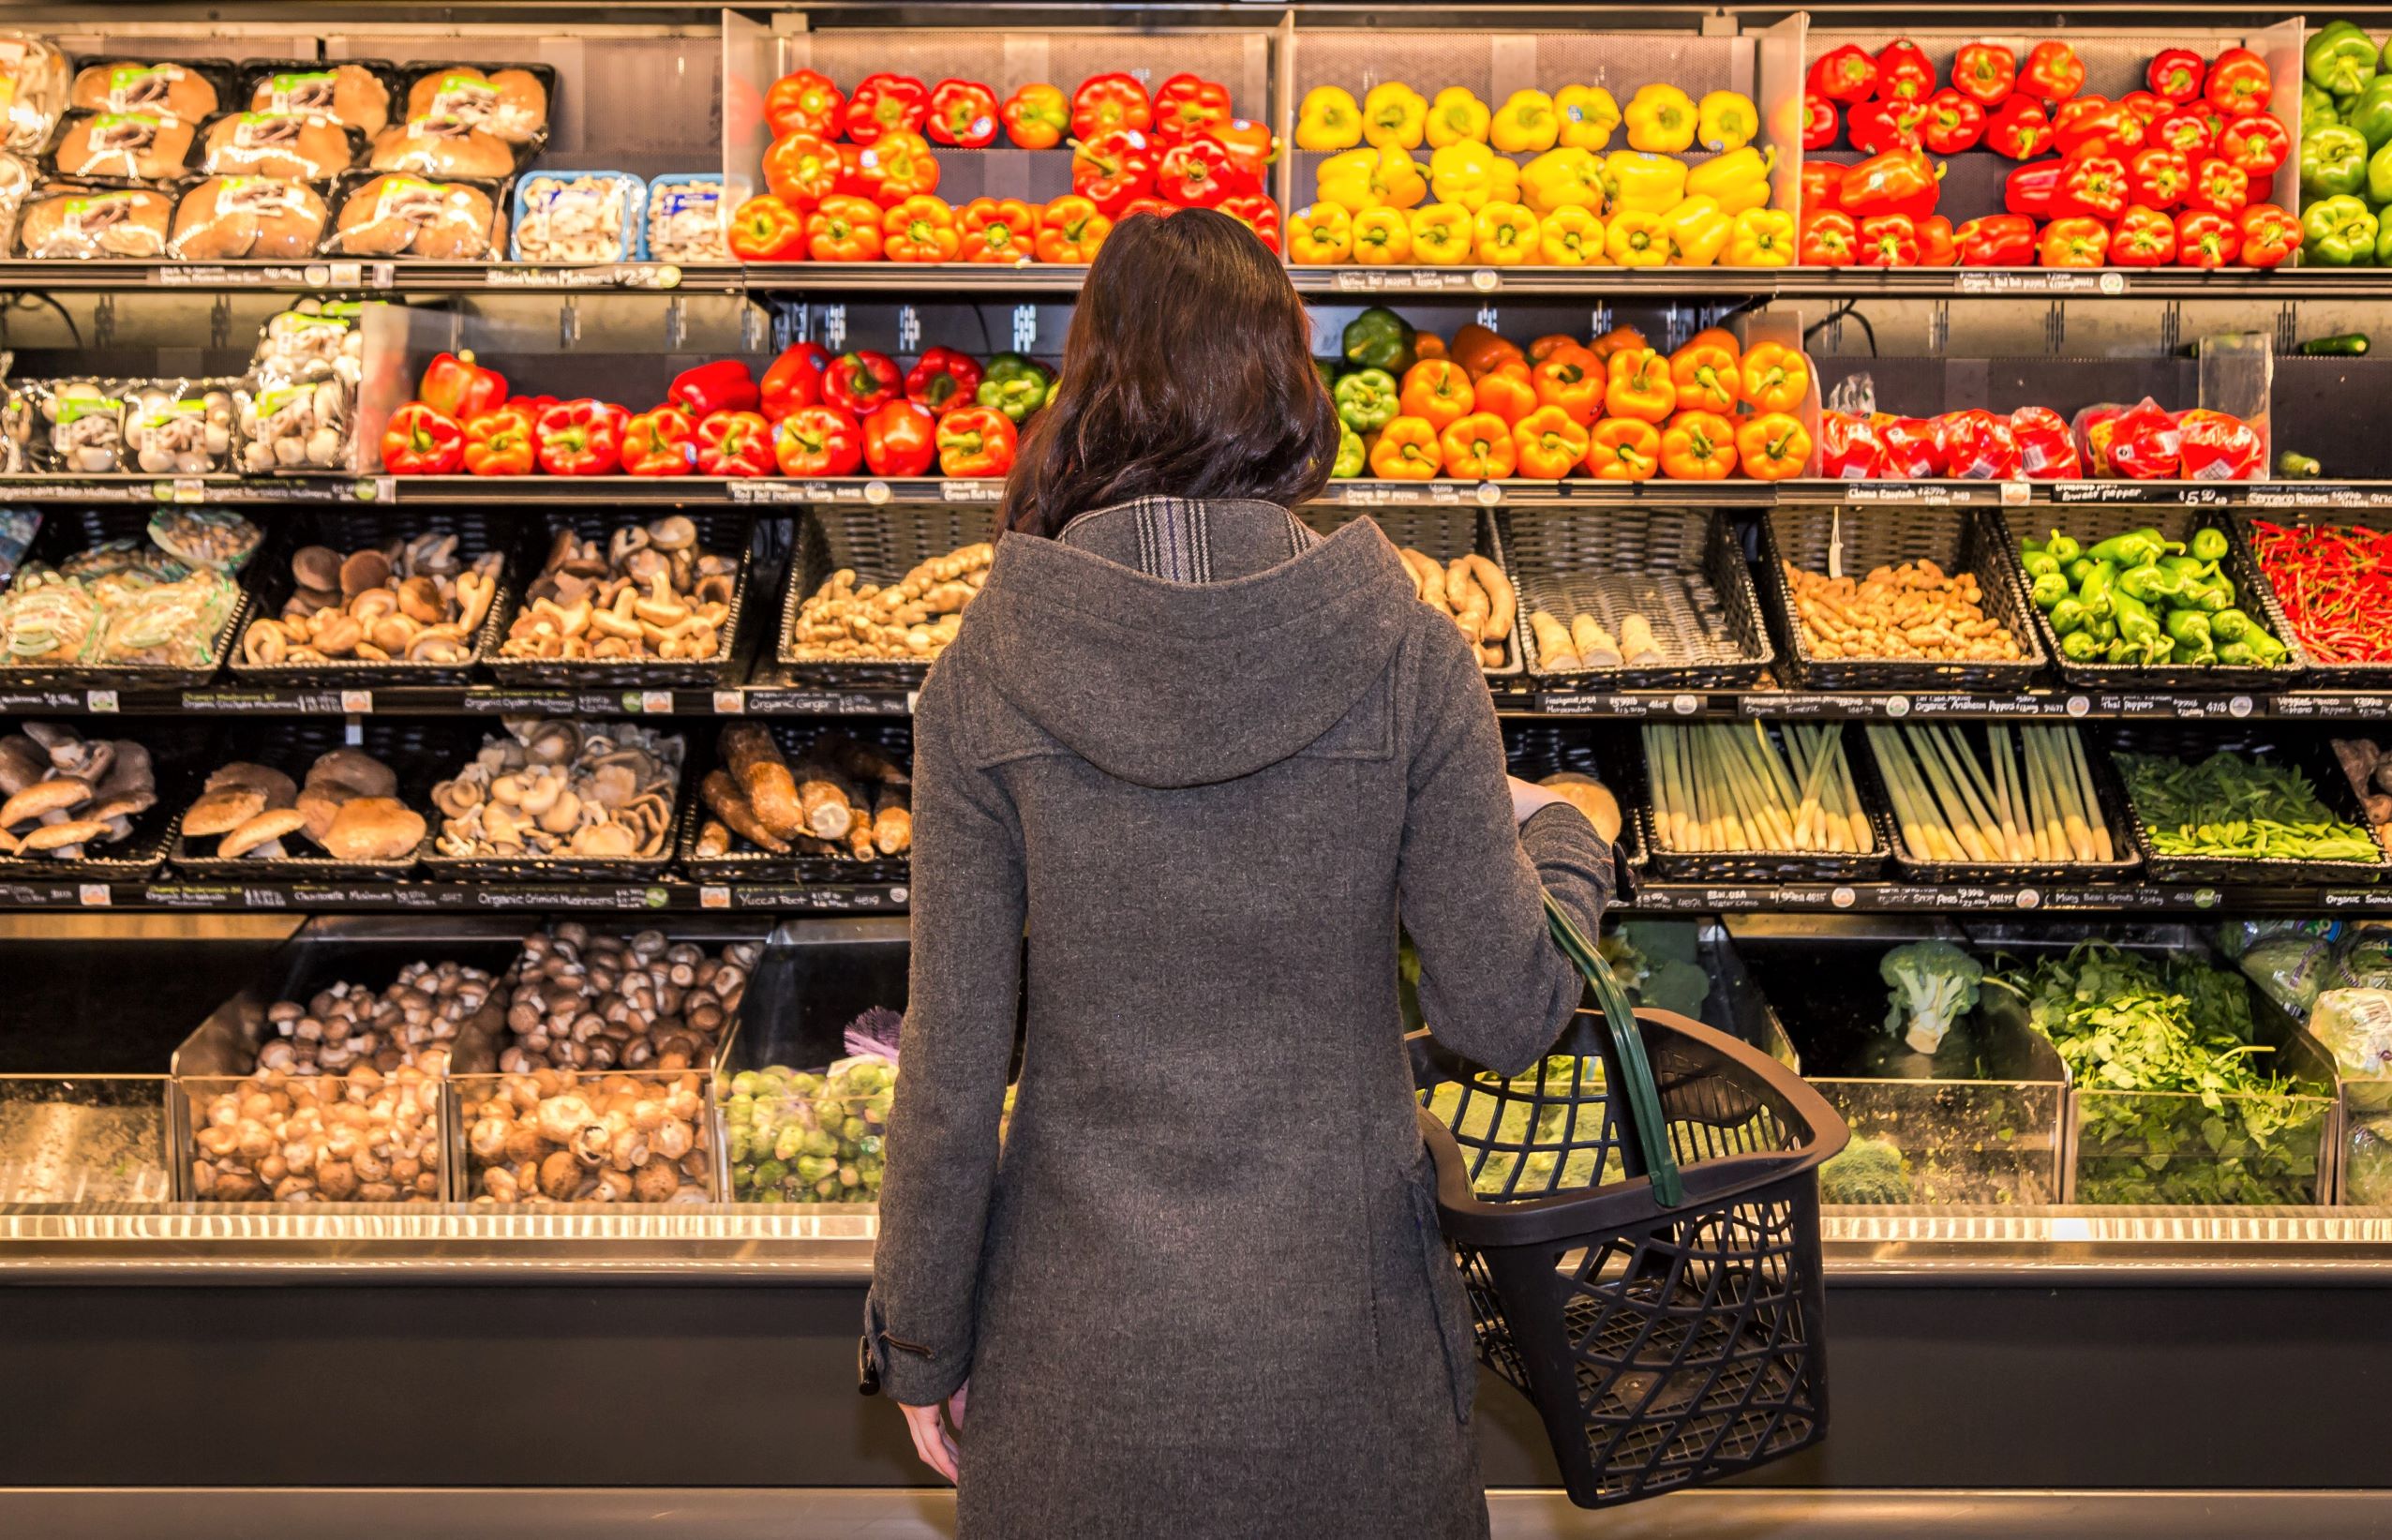 A woman examines produce at the supermarket